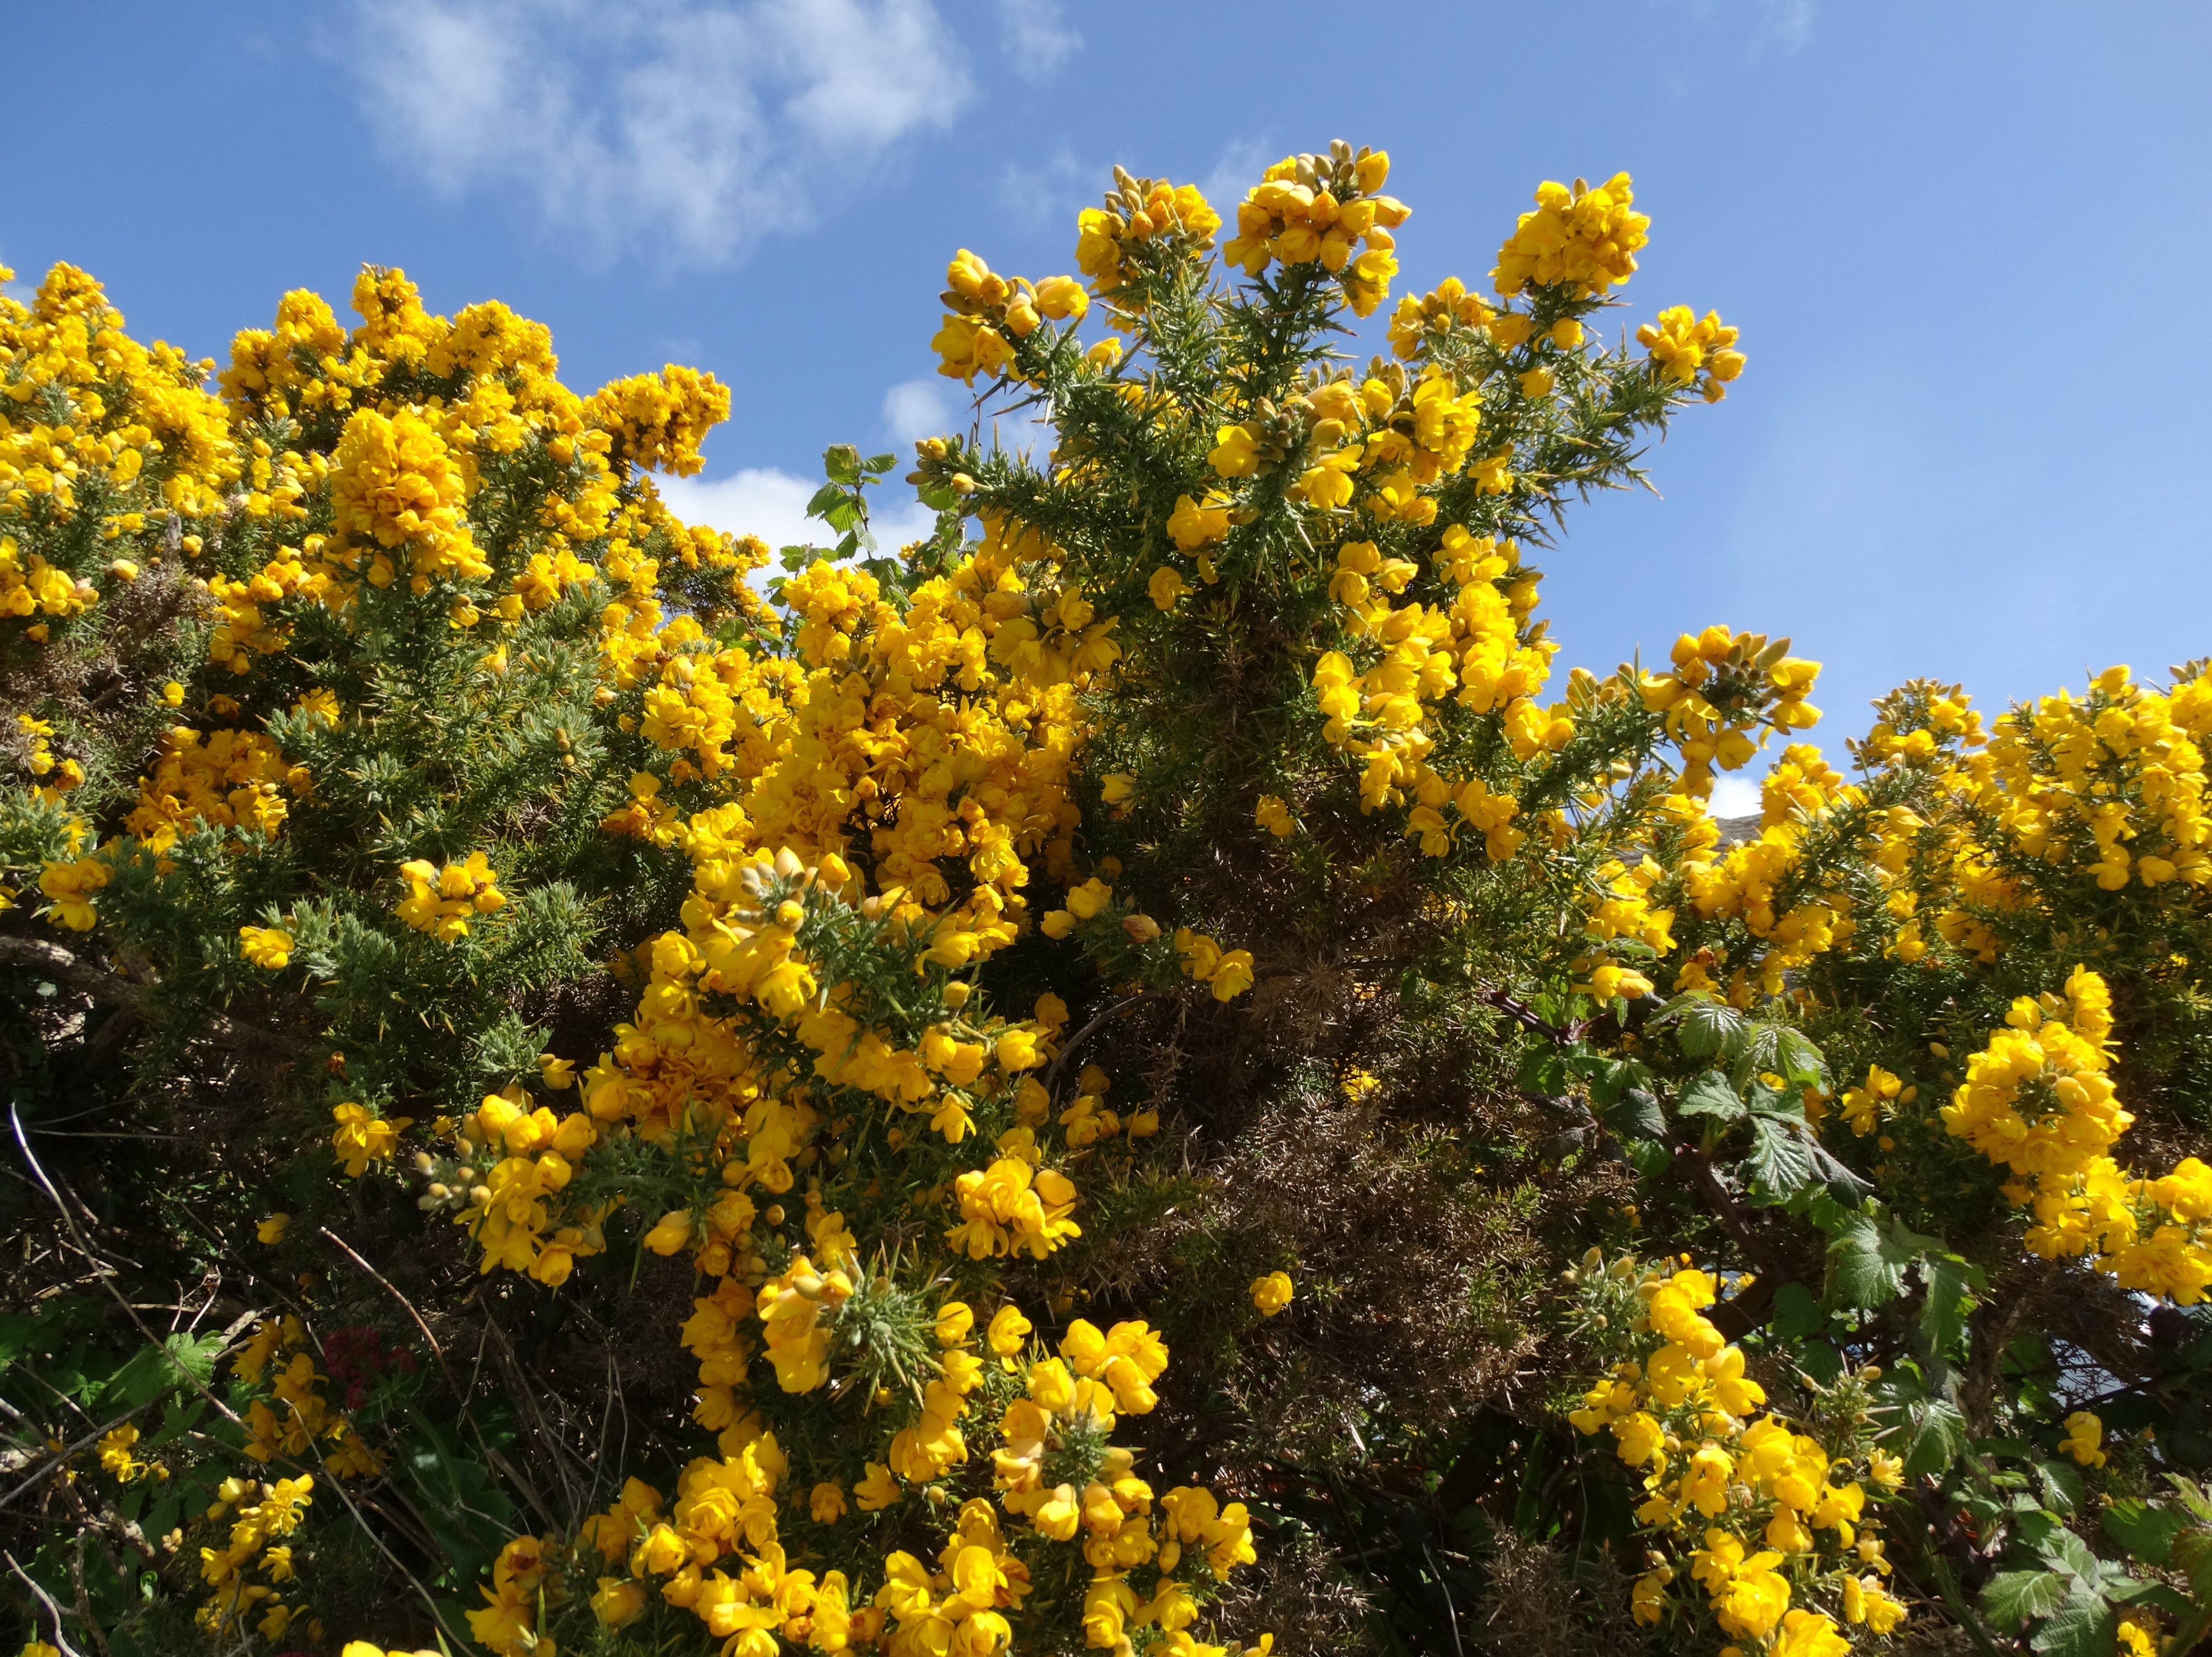 A researcher suggested humans could think about using gorse for protein in the future